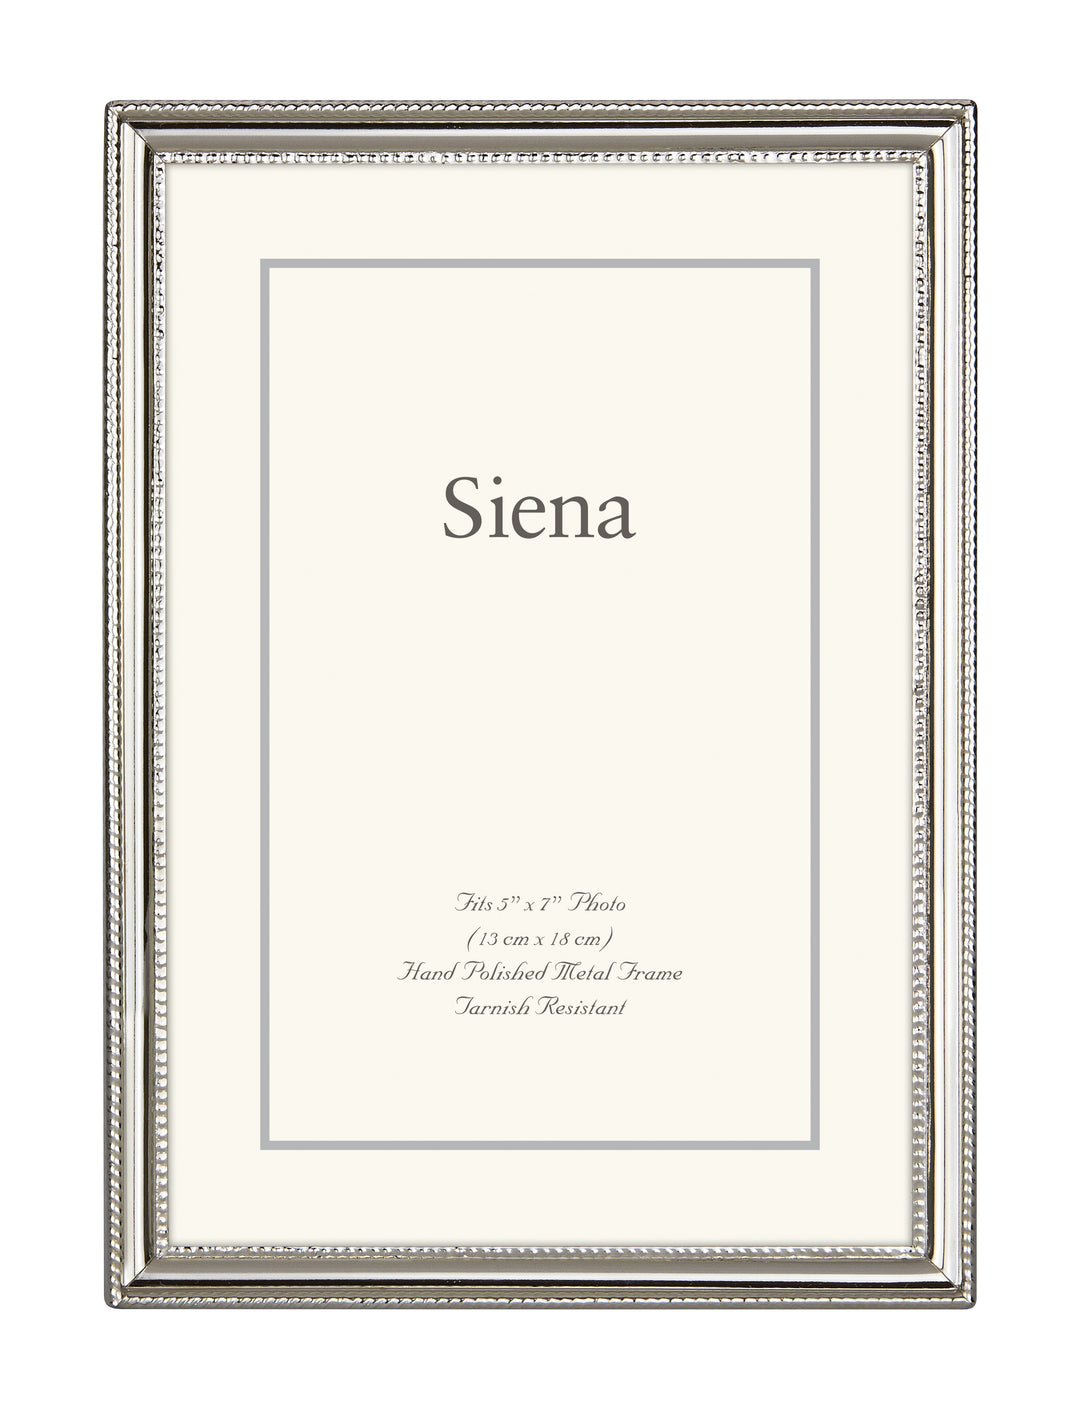 Narrow Double Bead Siena Silverplate Picture Frame - 8x10